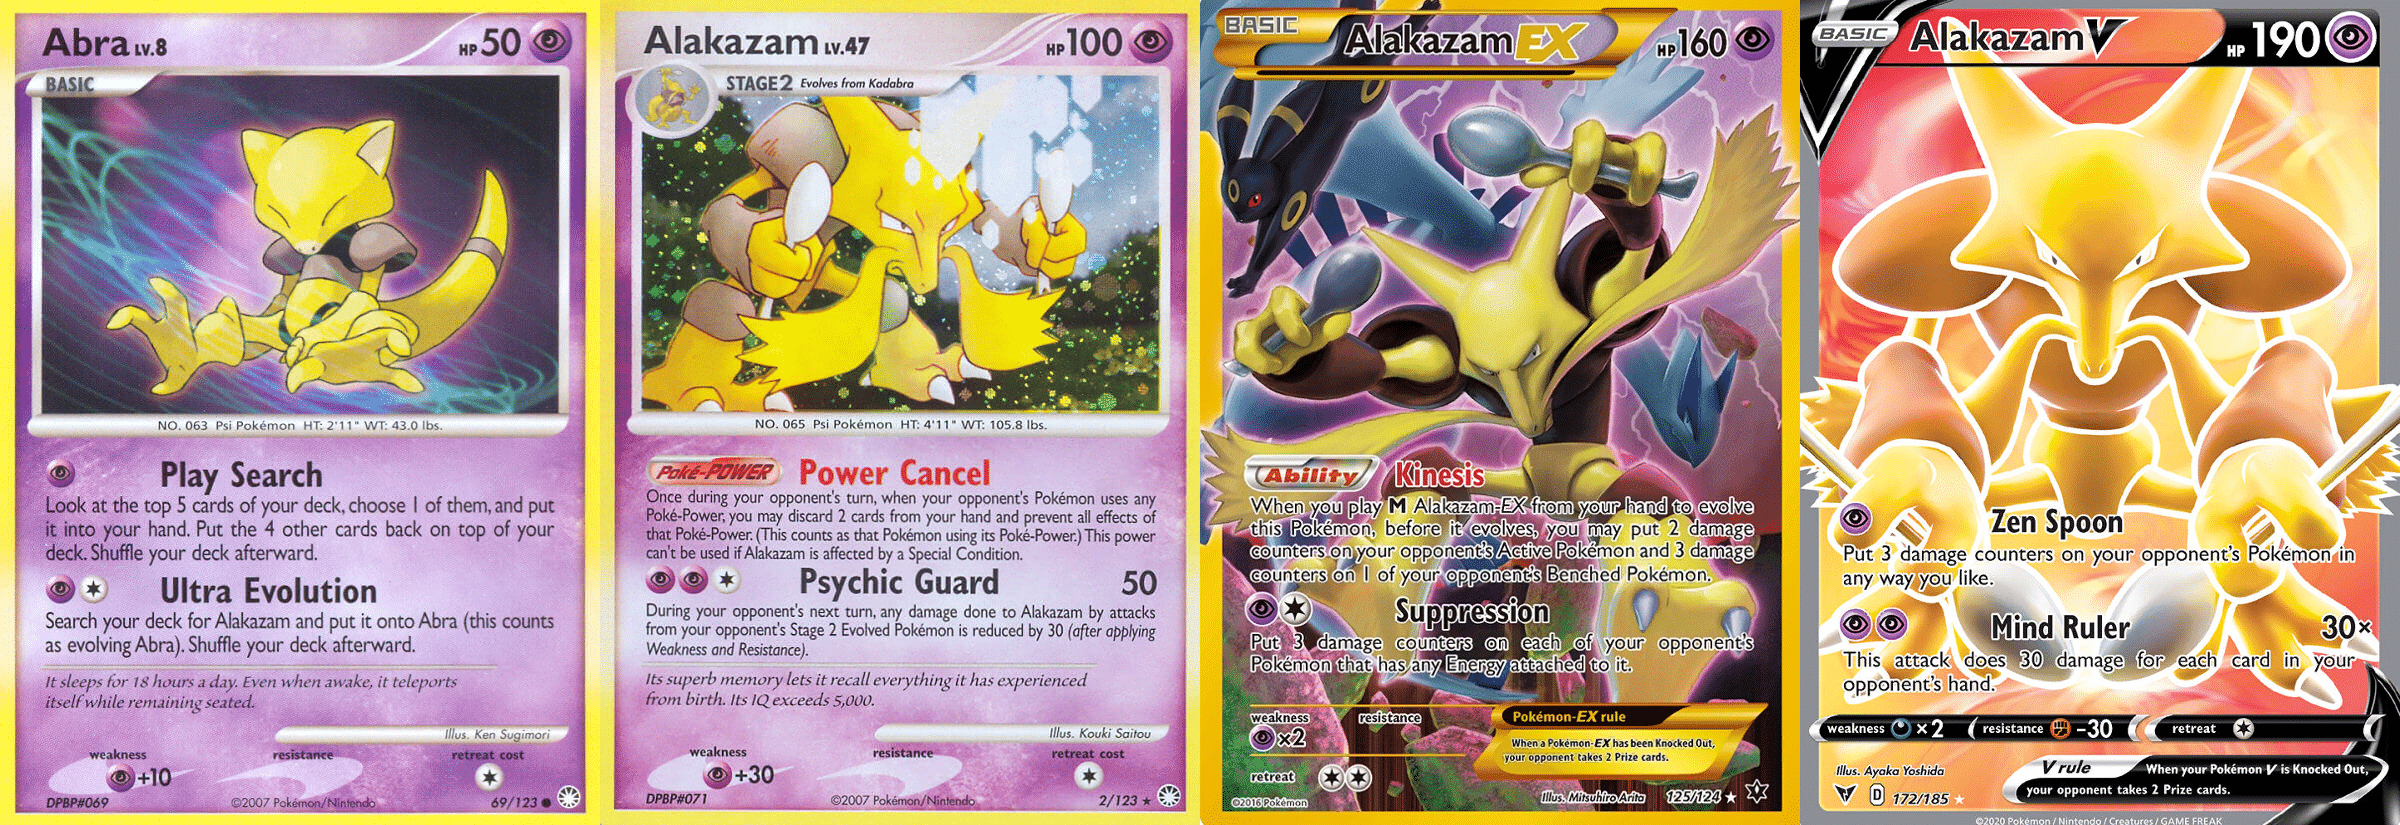 one Abra and three Alakazam cards from the Pokémon Trading Card Game